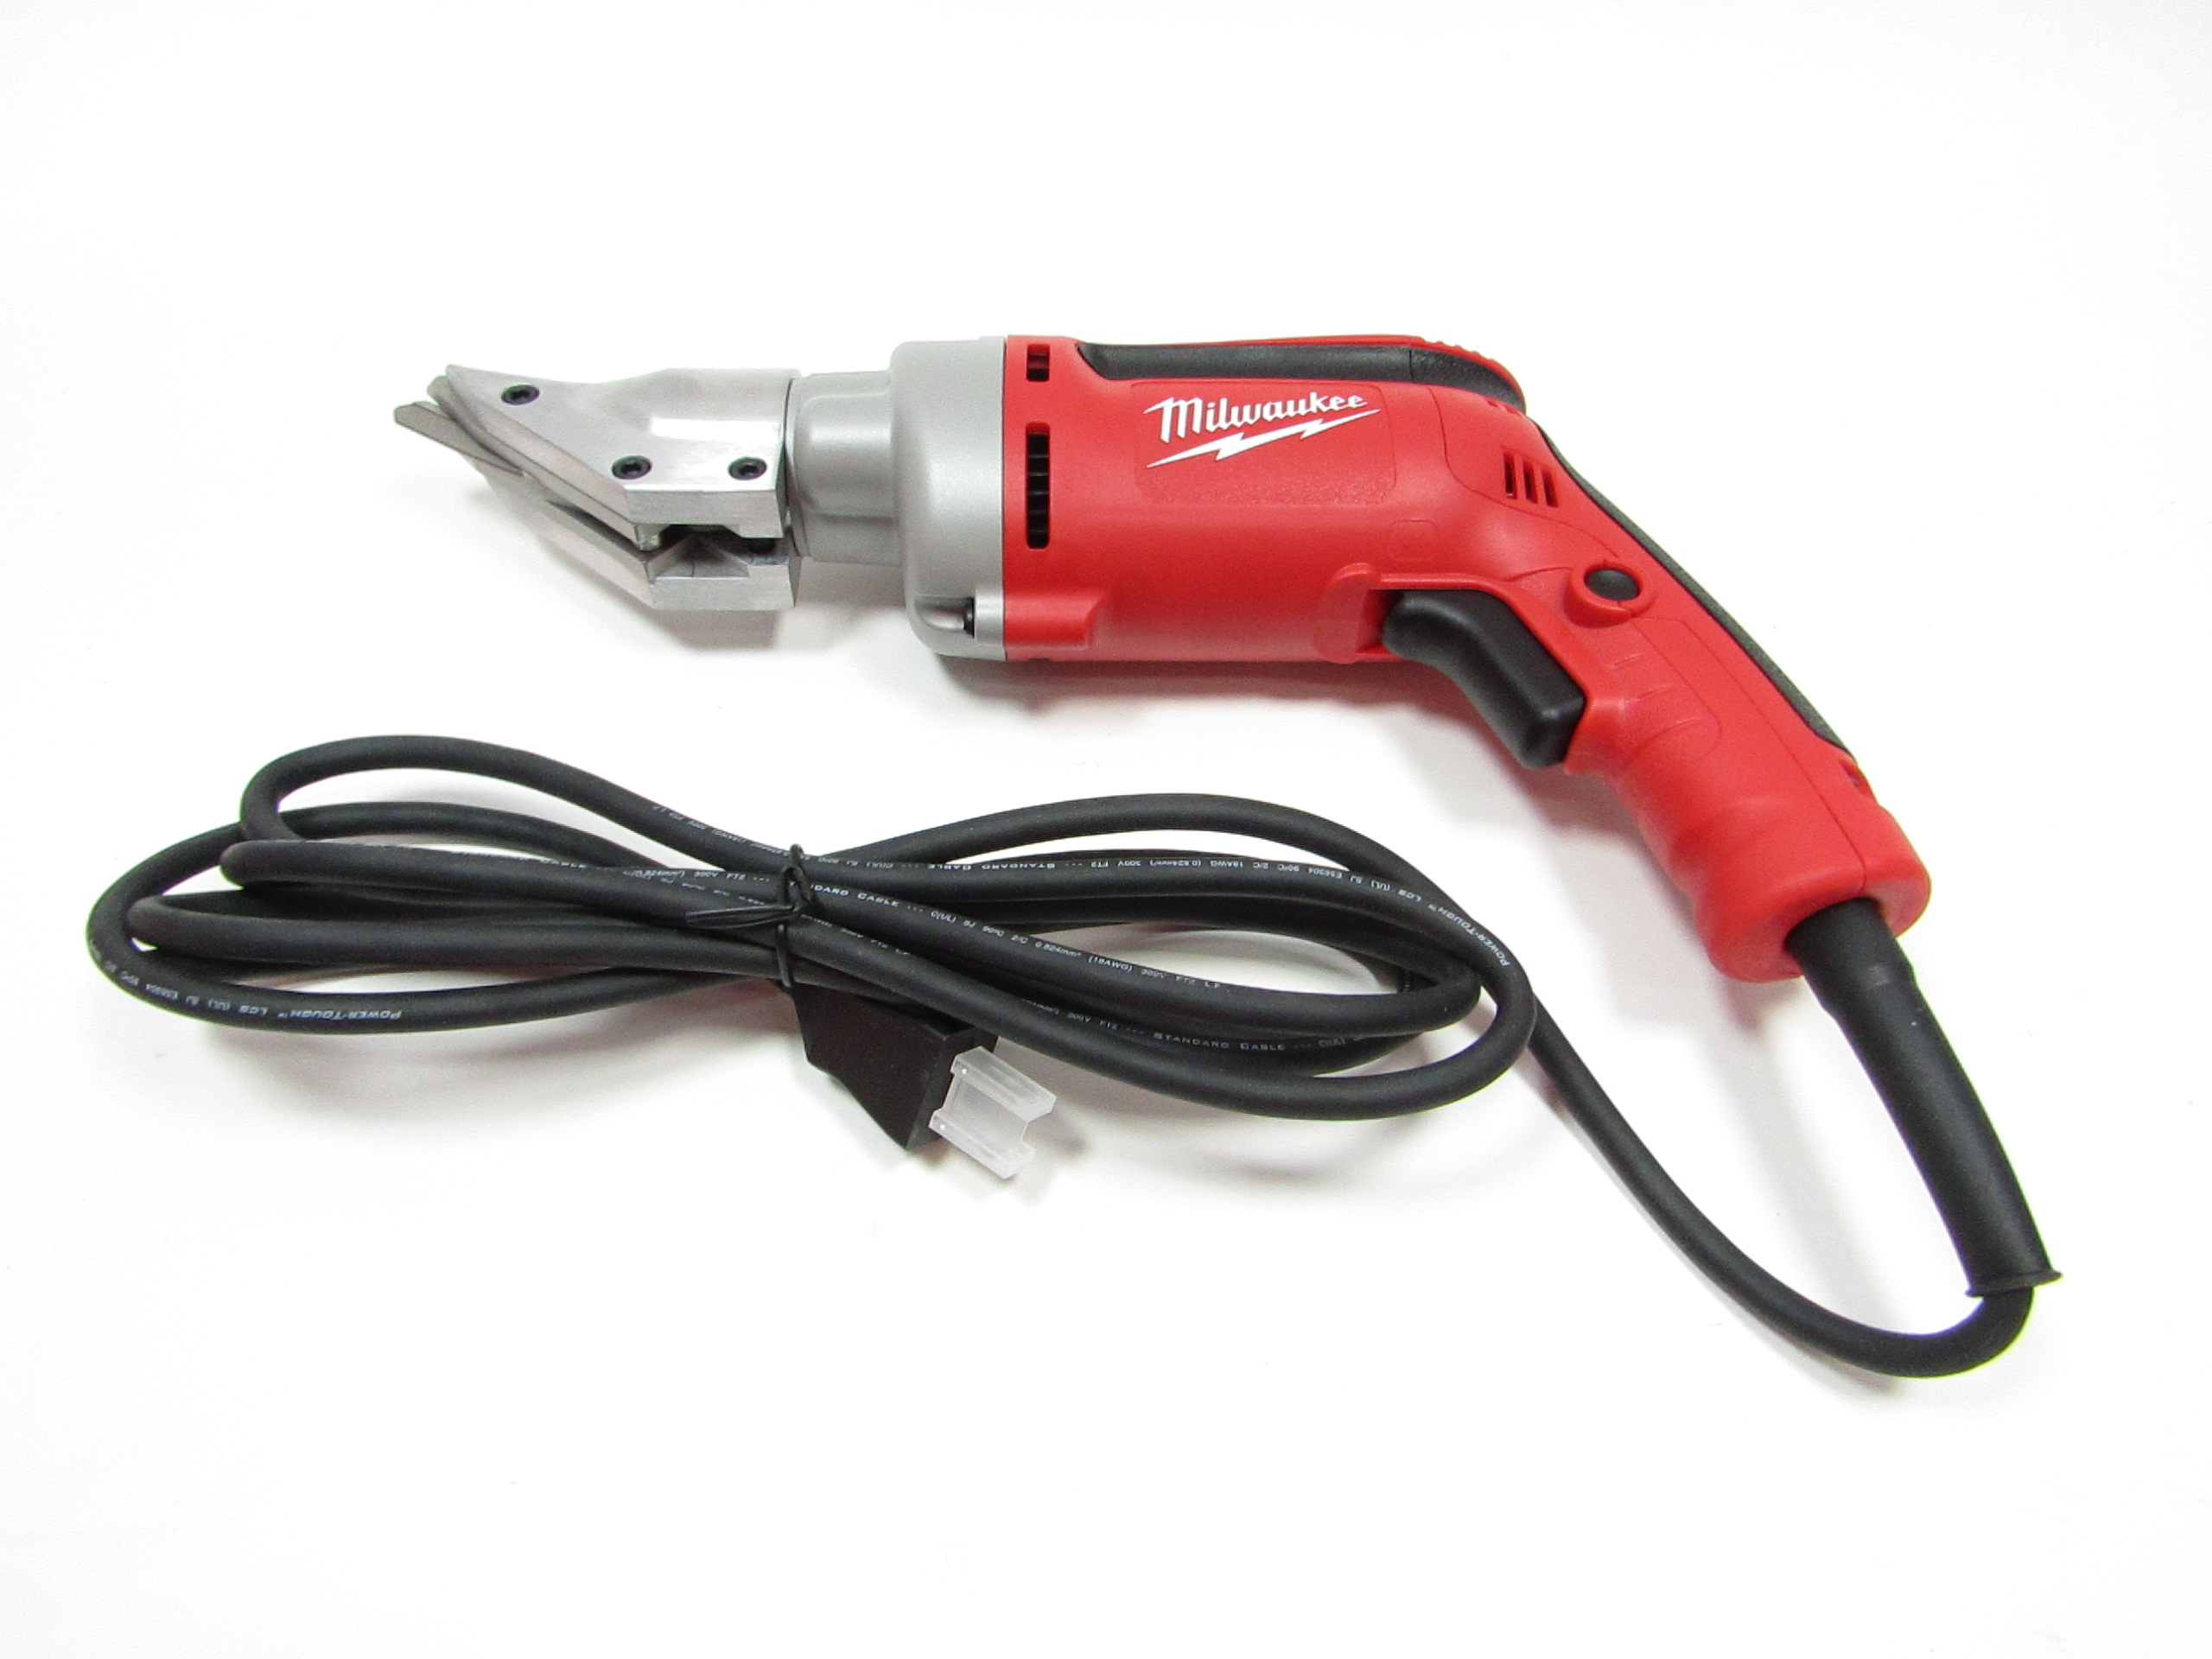 Milwaukee Tool - 4,000 SPM, 120 Volt, Angled Handle, Handheld Electric Shear  - 09968918 - MSC Industrial Supply